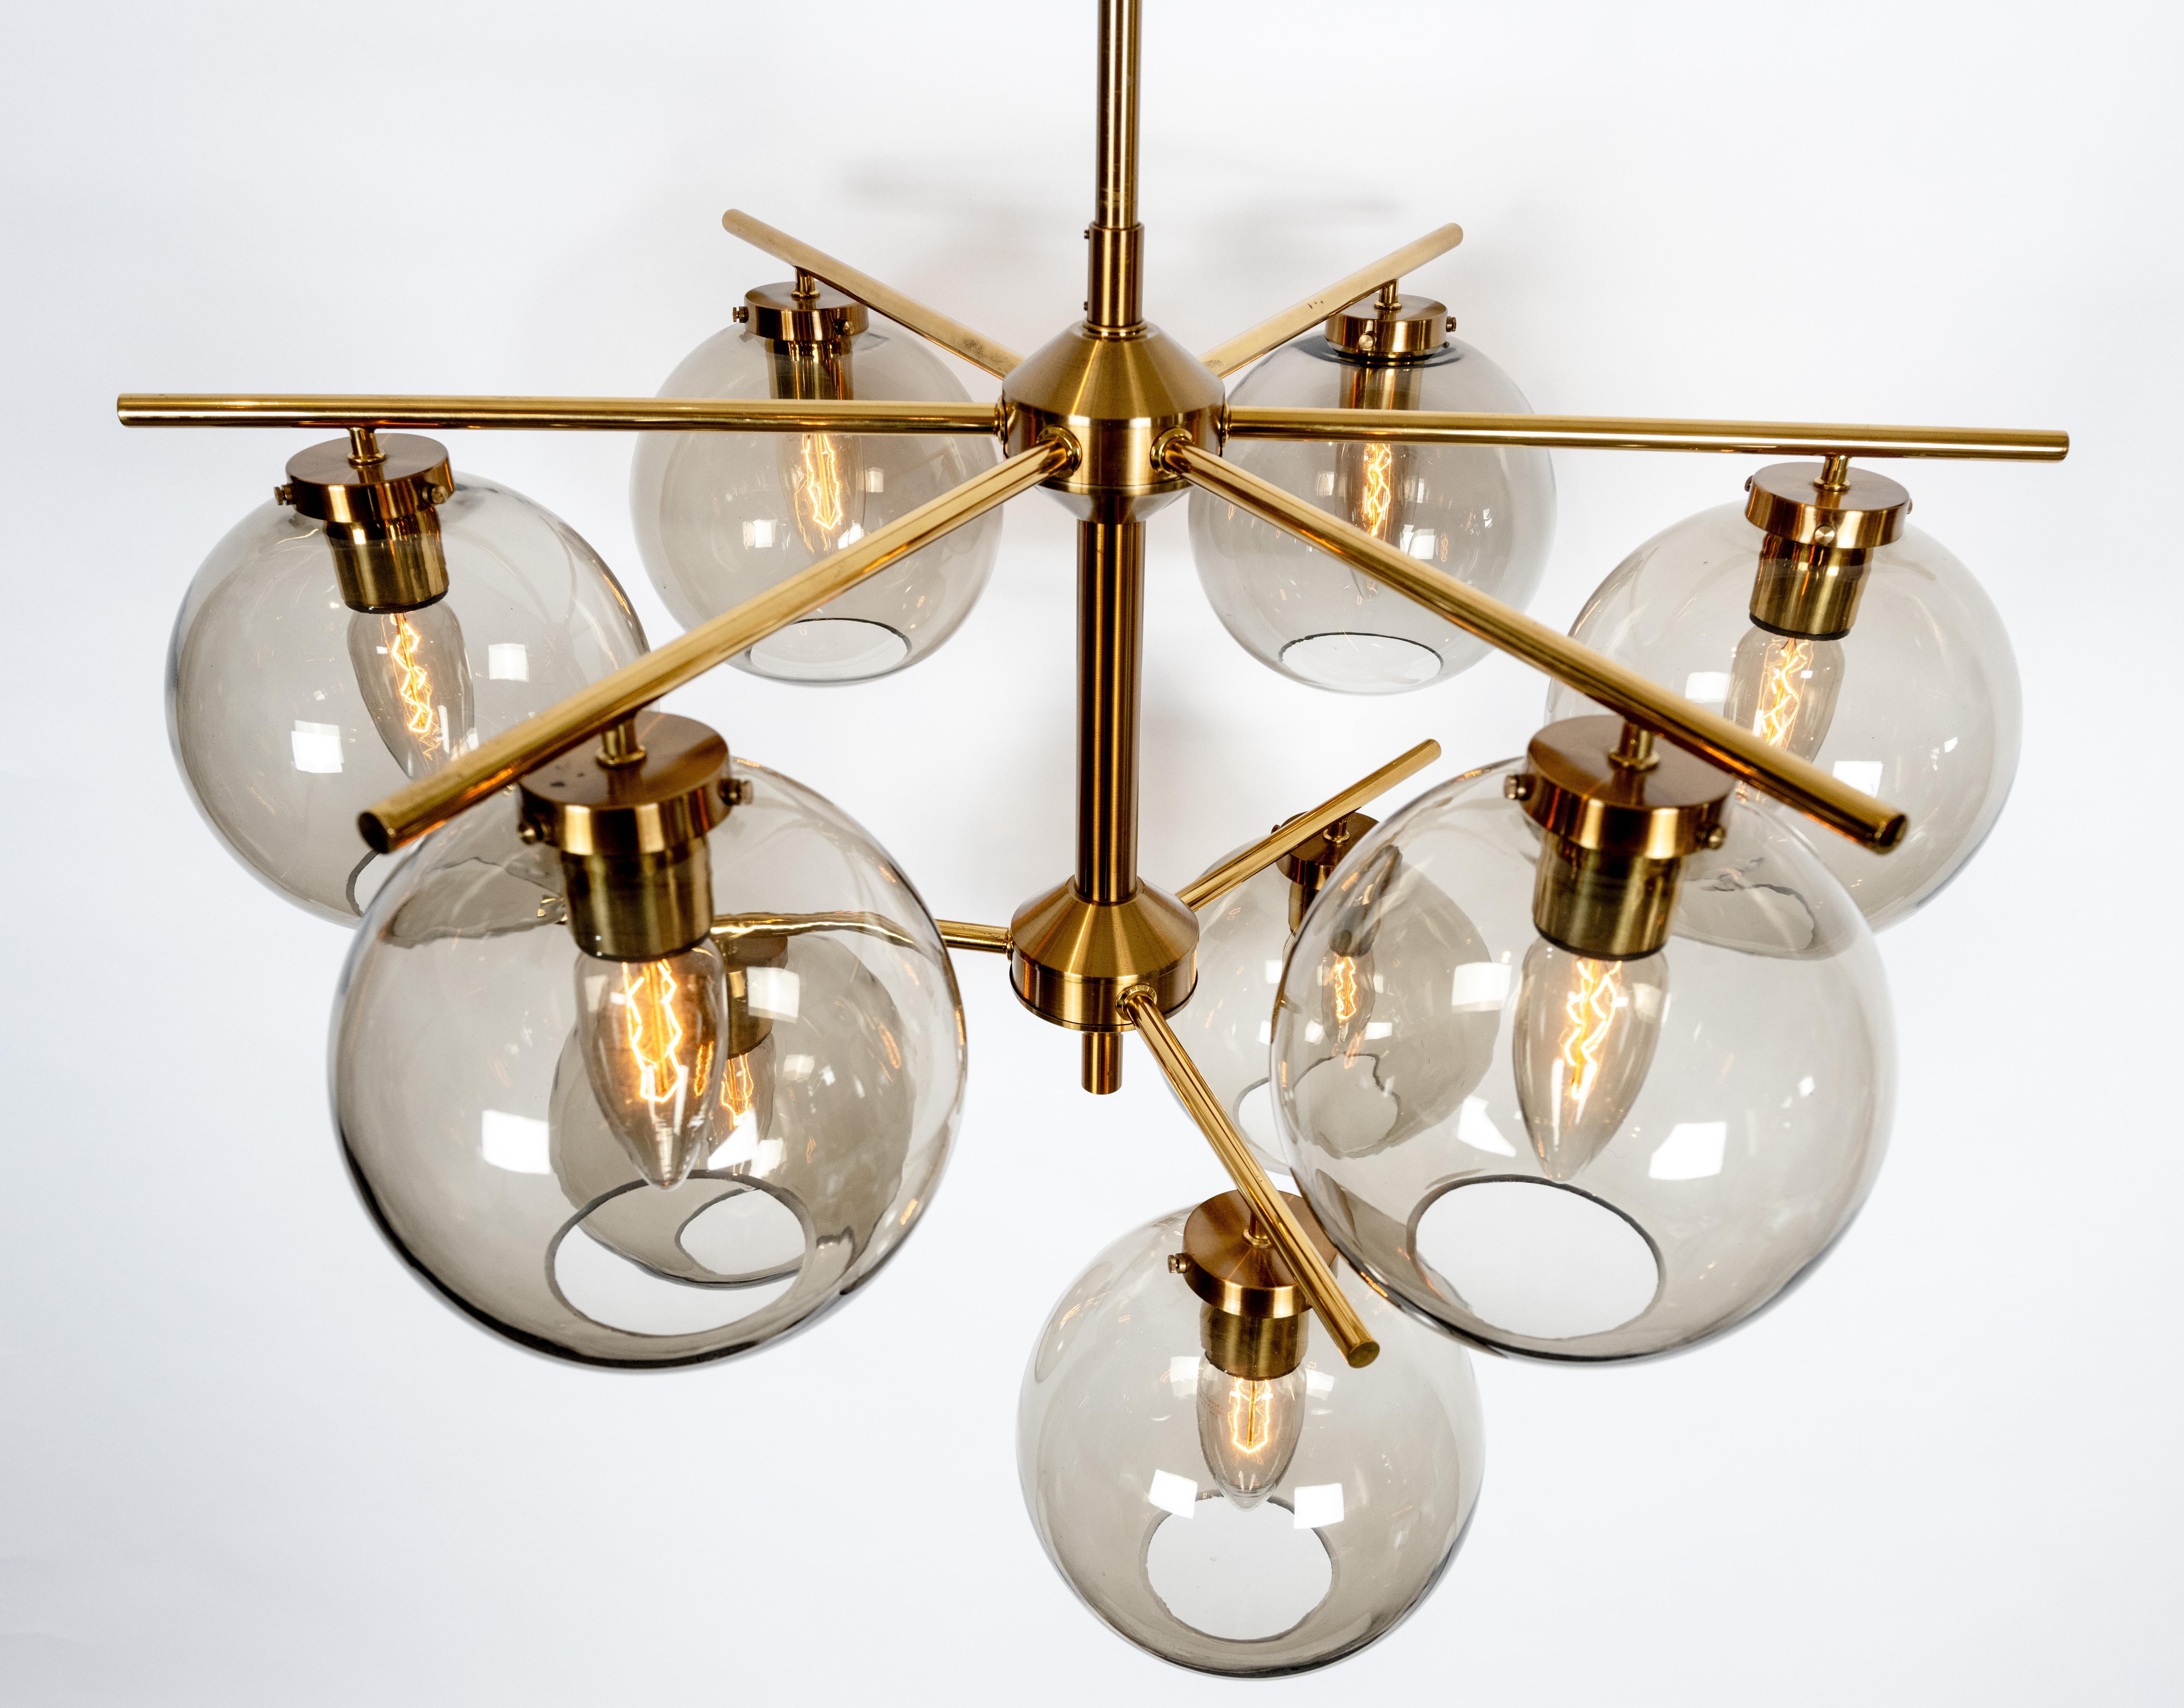 A rare set of four nine-light contemporary design celling fixtures designed by Holger Johansson. The brass frames with light patina and lacquered finish having smoke-colored glass round shades, each concealing a medium socket maximum wattage 100.